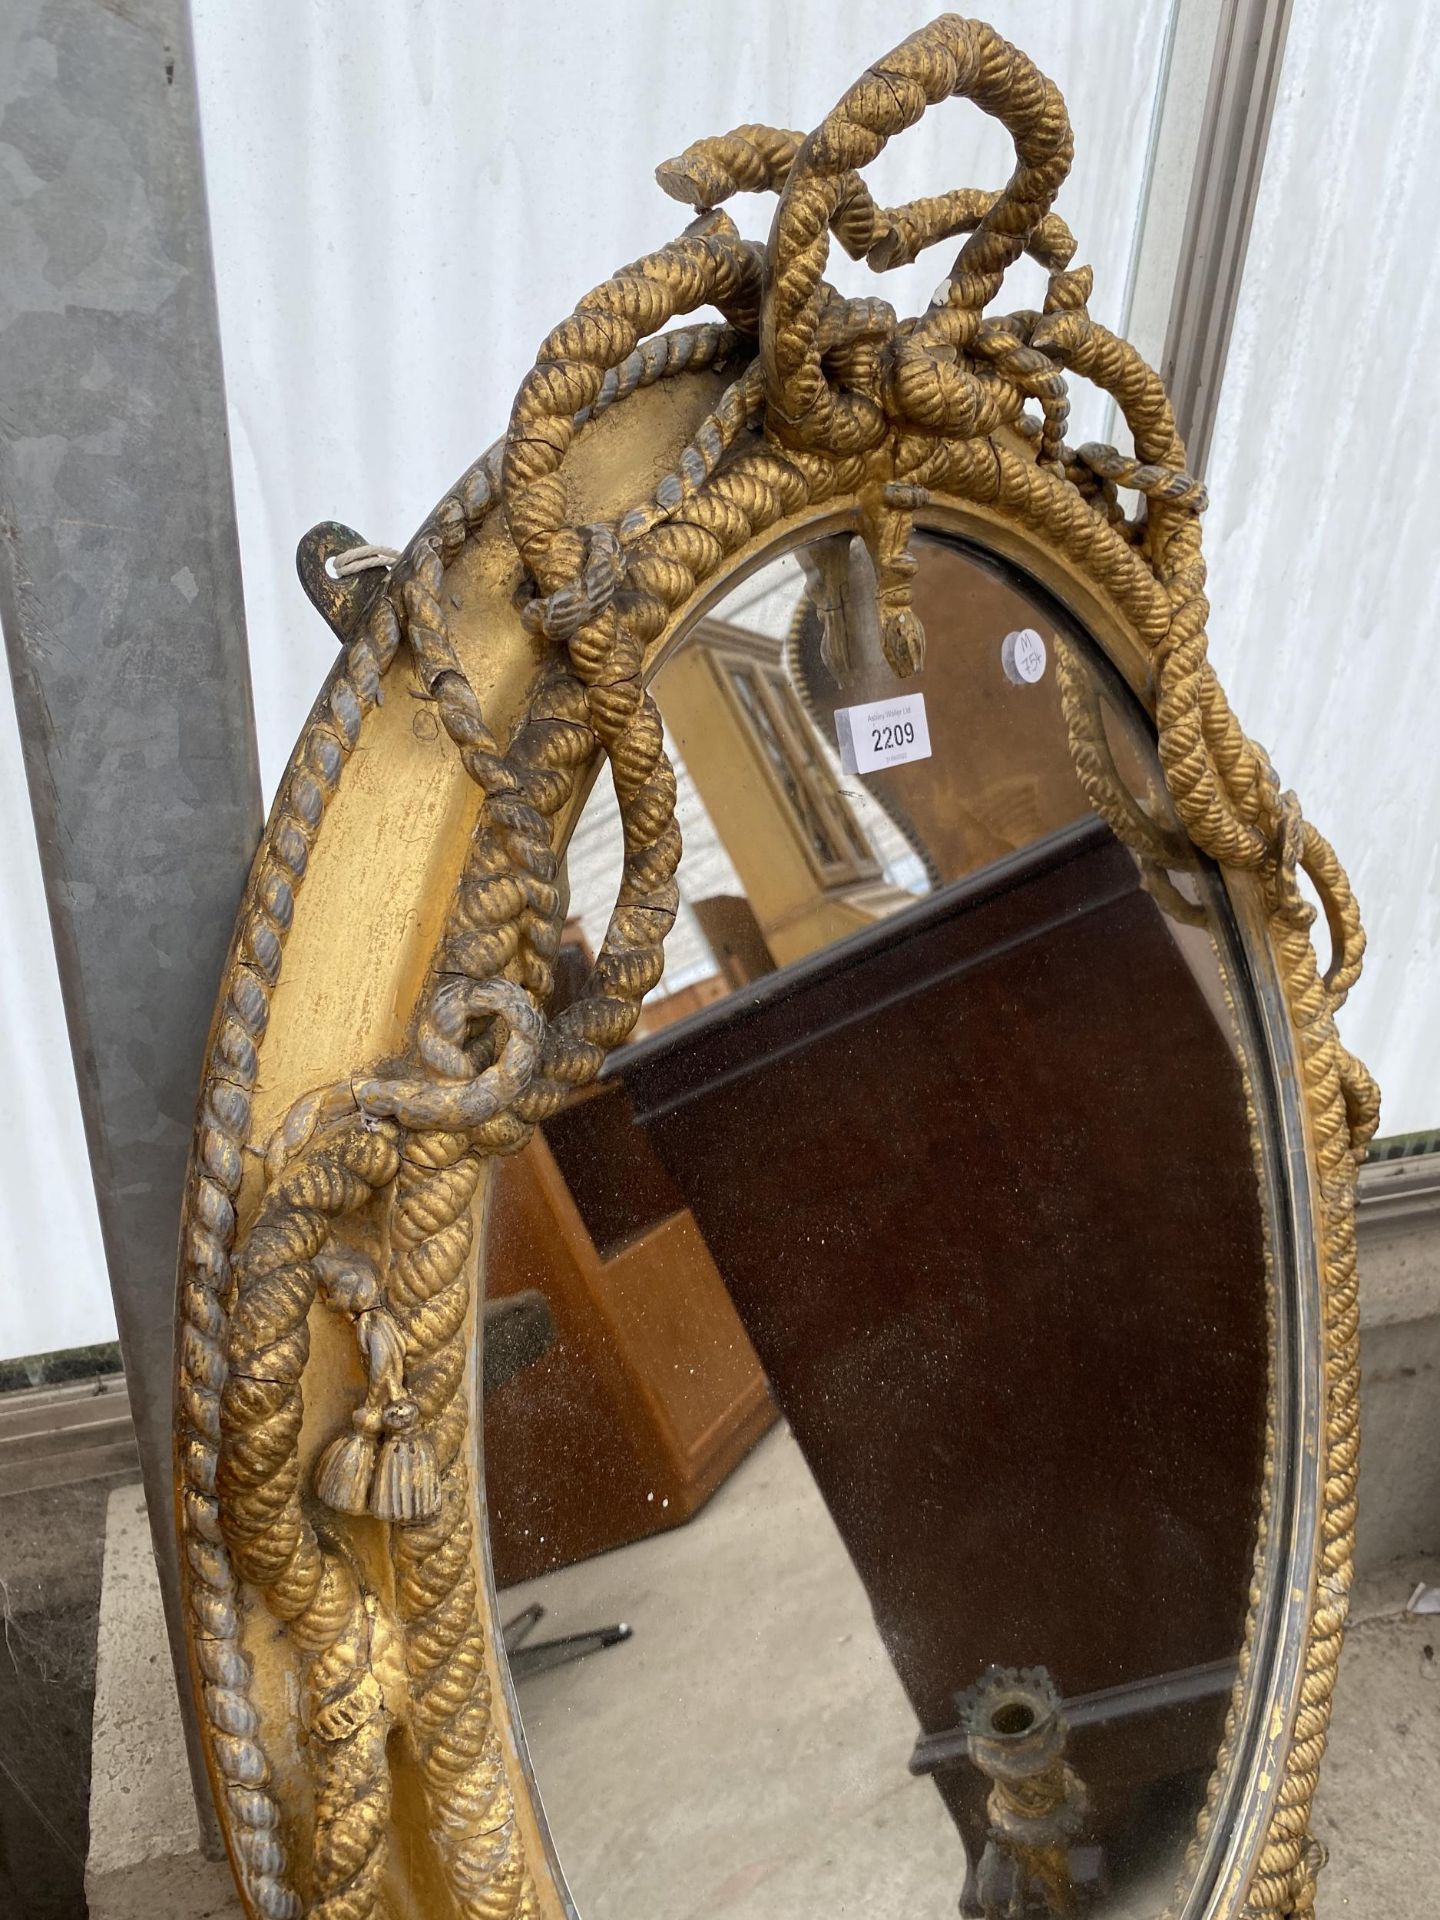 AN ELABORATE VICTORIAN GILT FRAMED MIRROR WITH ROPE DESIGN AND LOWER CANDLE HOLDERS - Image 5 of 6